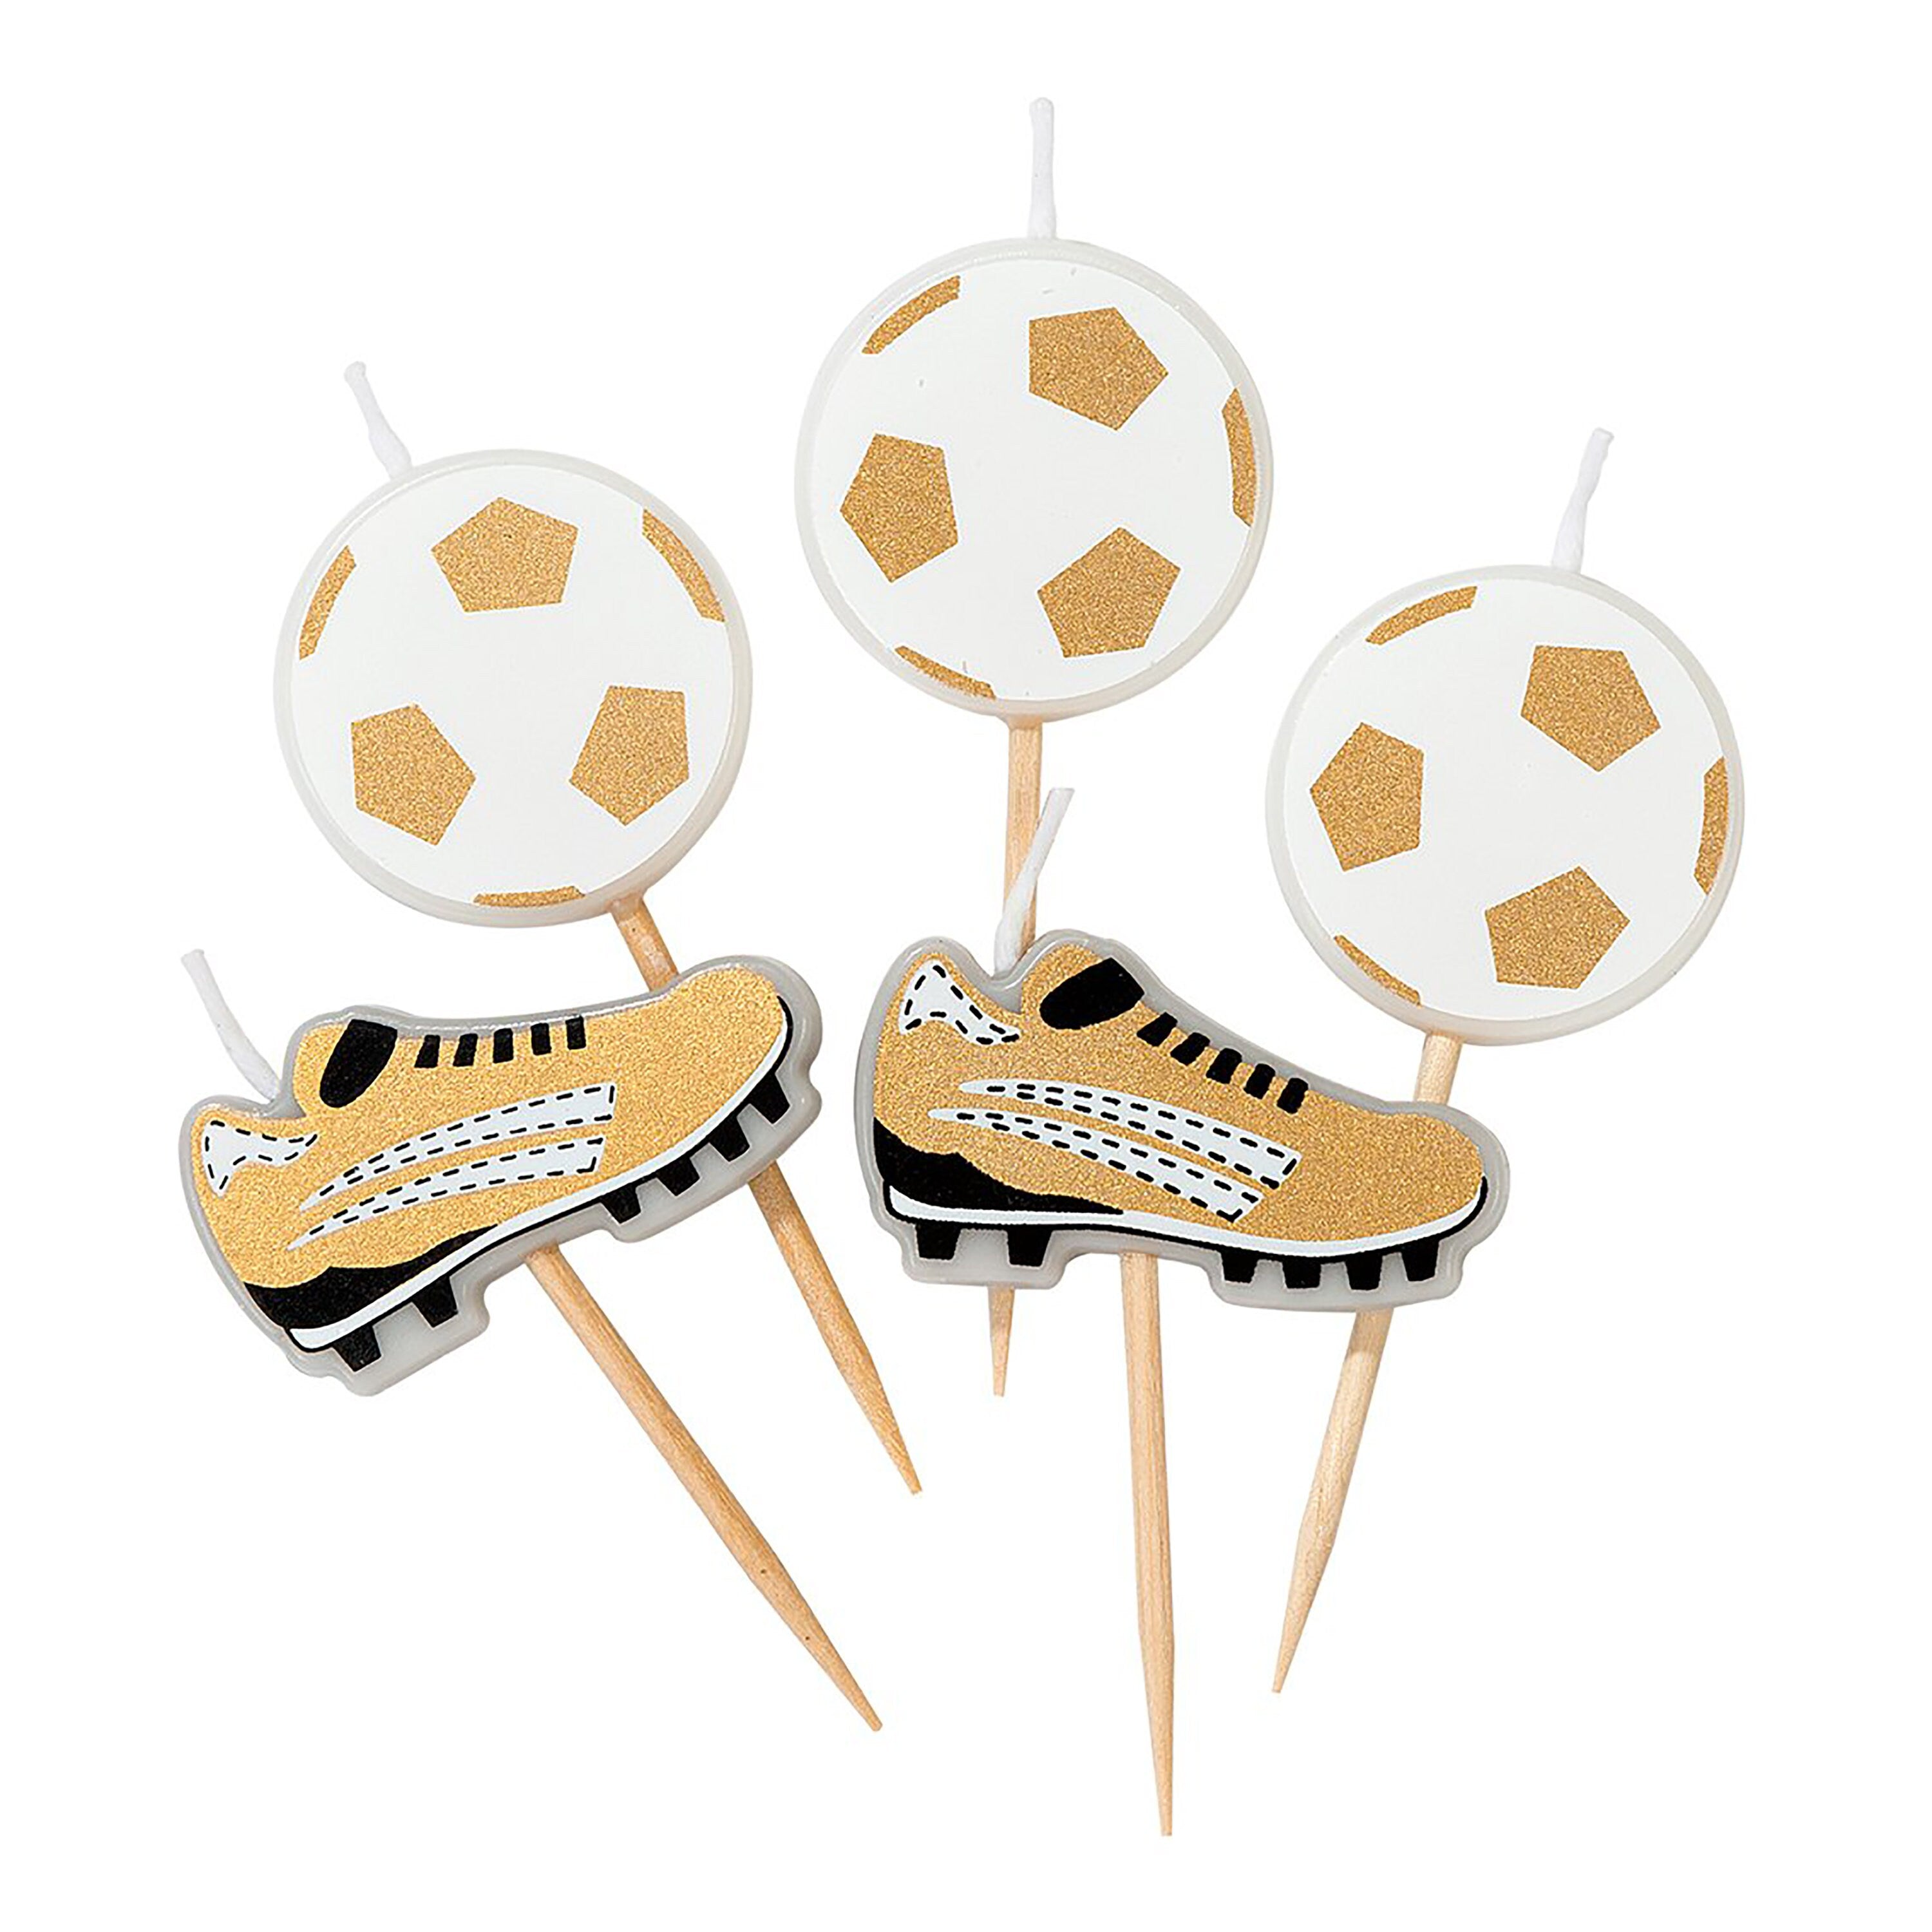 Soccer Birthday Candles | Soccer Birthday Party - Sports Party Theme - Soccer Birthday - Soccer Party Theme -Soccer Party Supplies